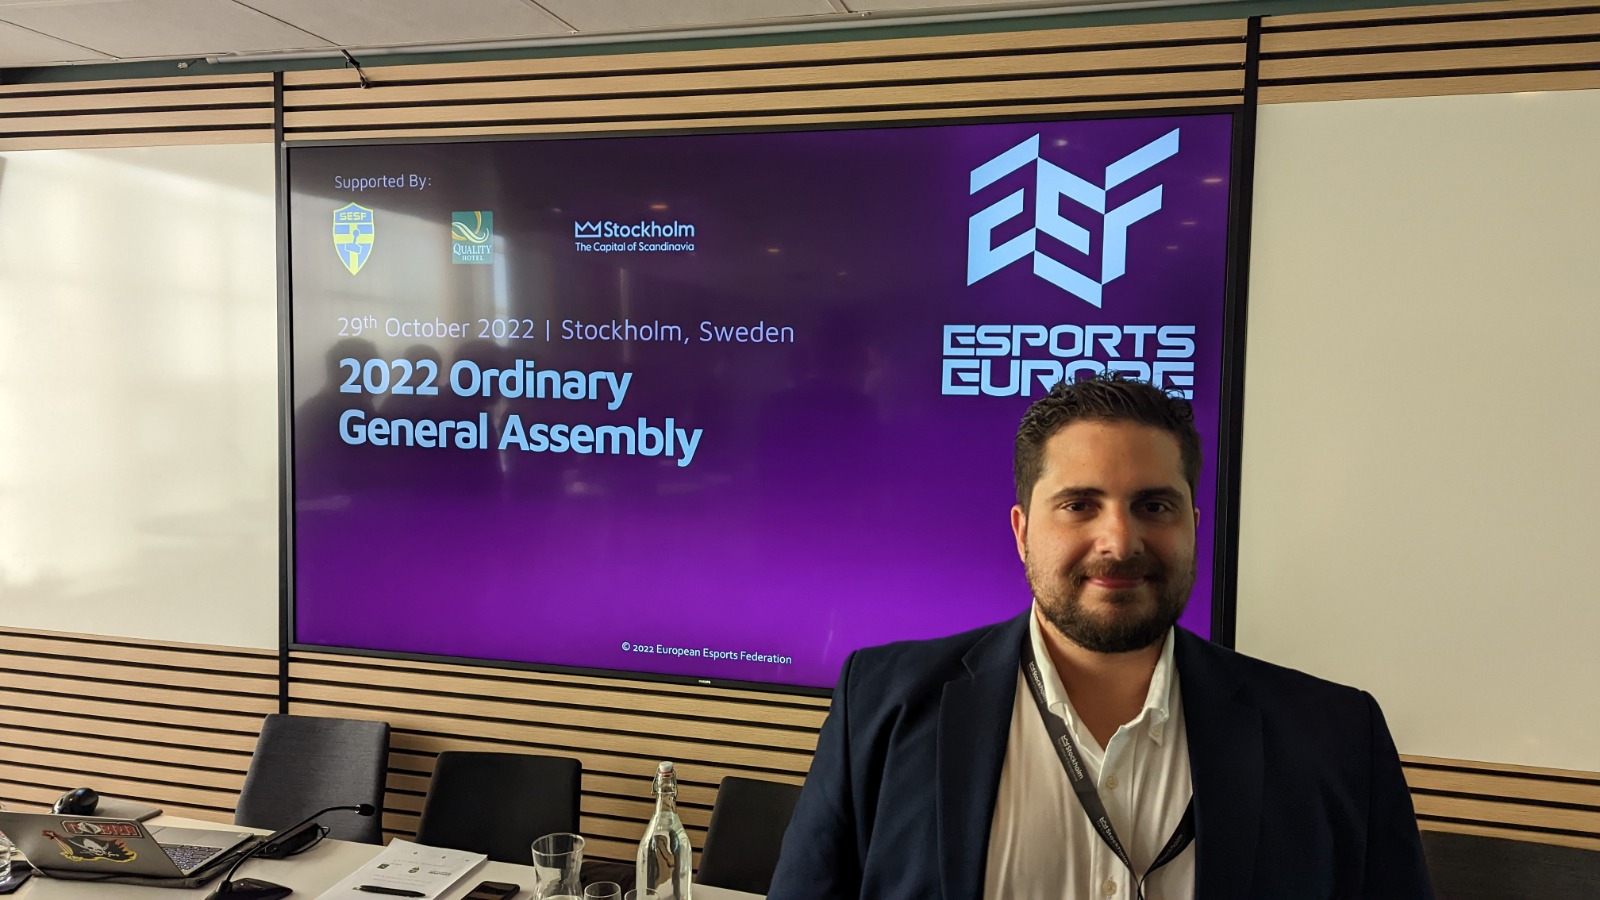 Malta Esports Association approved as a Full Member of the European Esports Federation